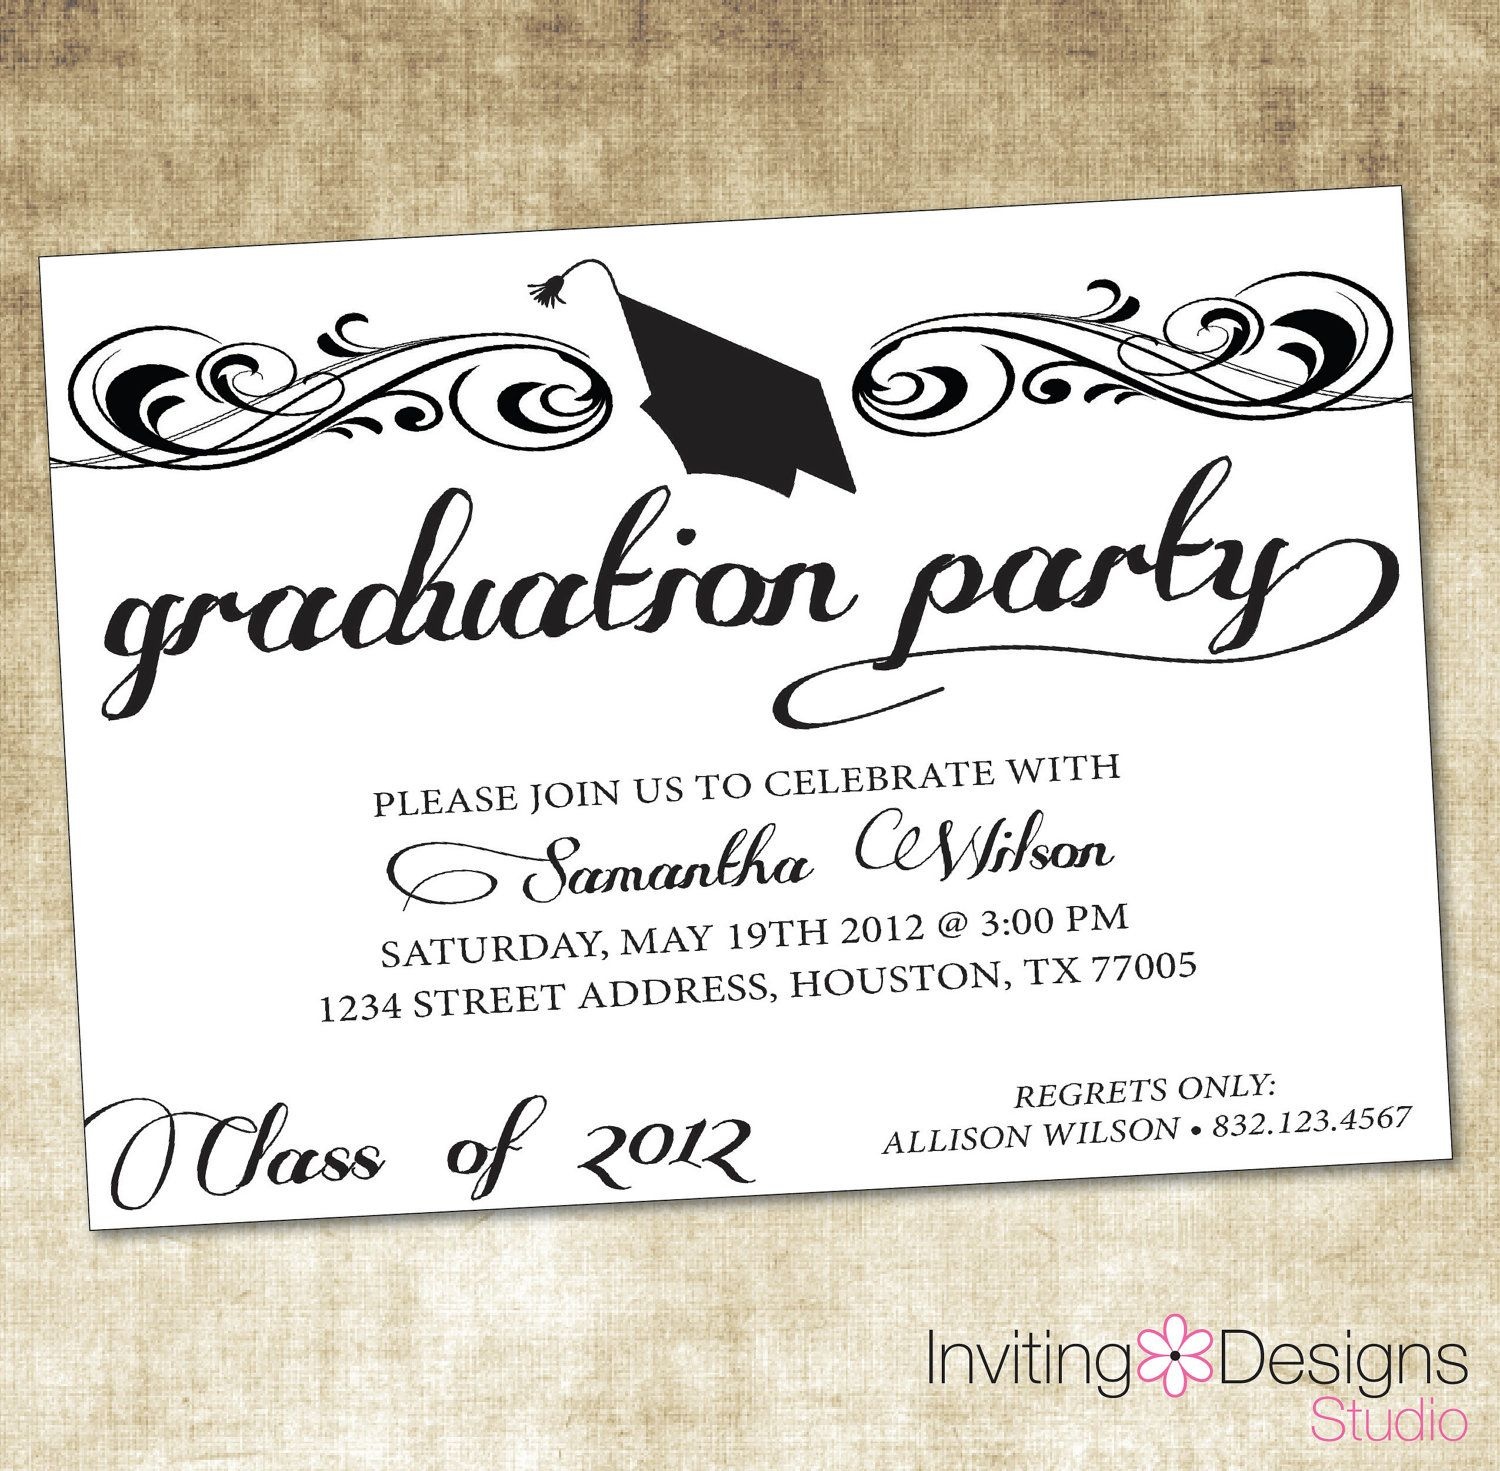 Image Result For Graduation Party Invitation Wording Ideas | Zach - Free Printable Graduation Party Invitations